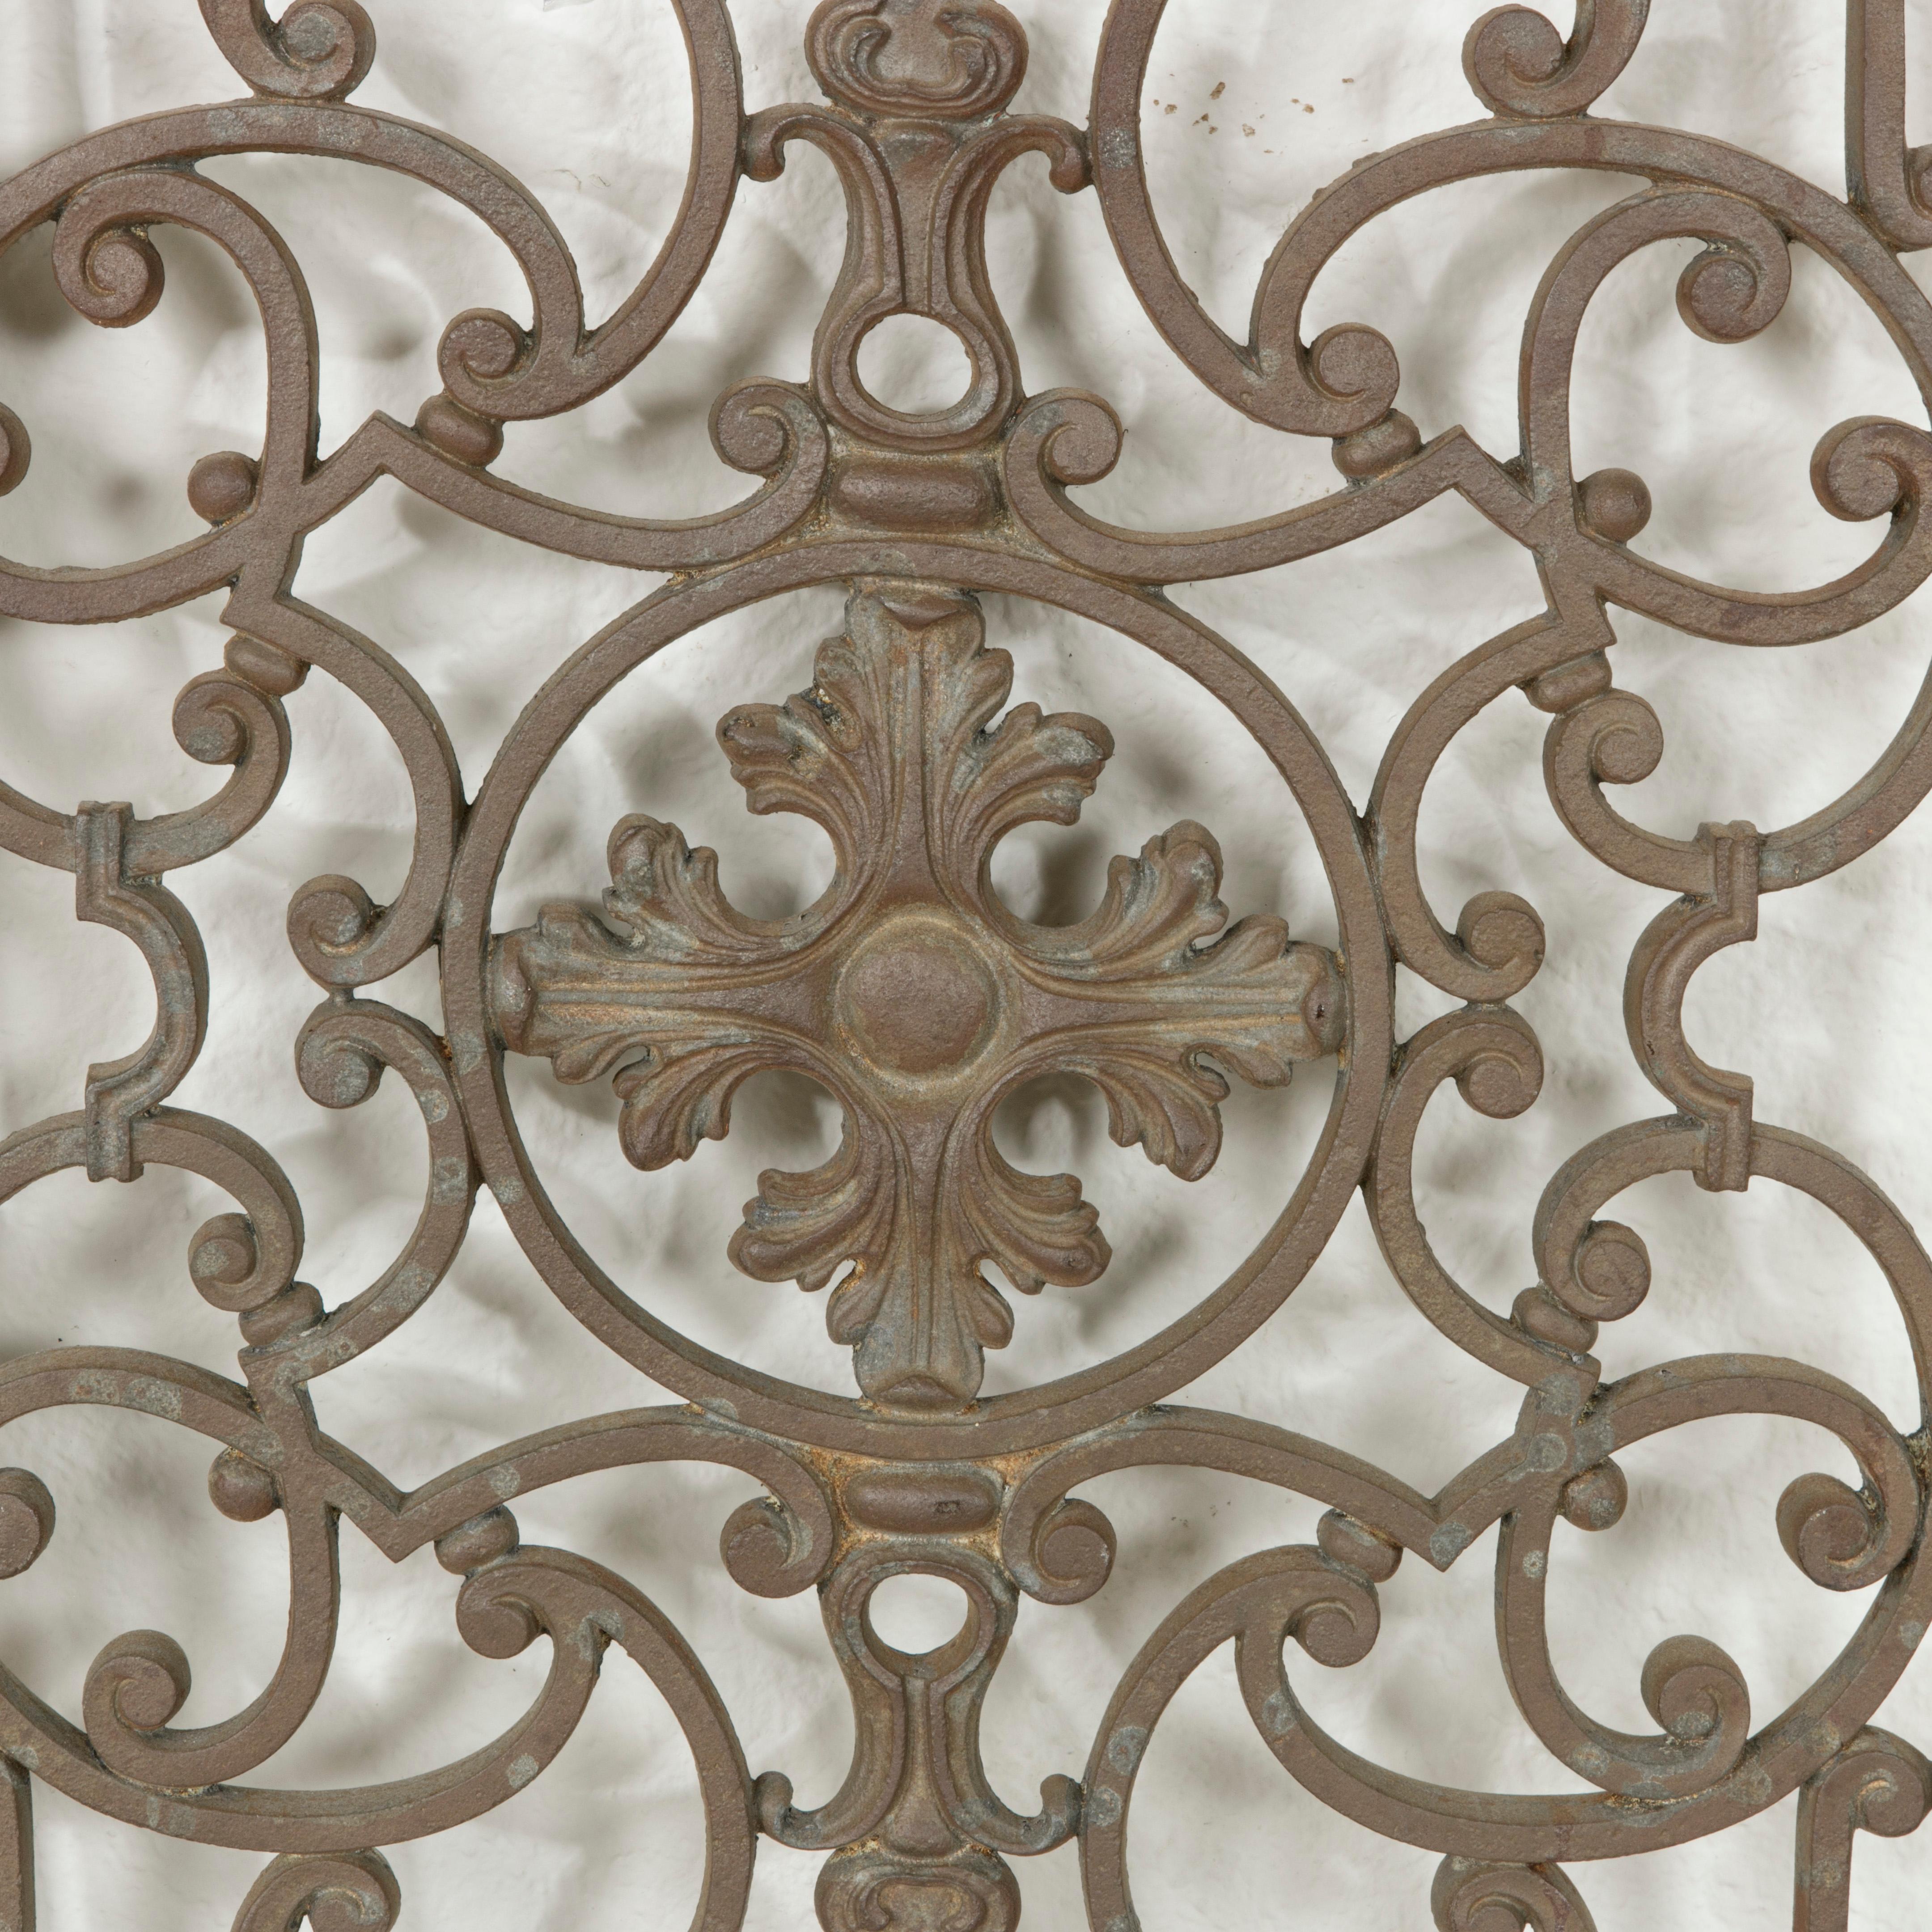 Pair of Early 20th Century French Iron Gates with Symmetrical Design 3